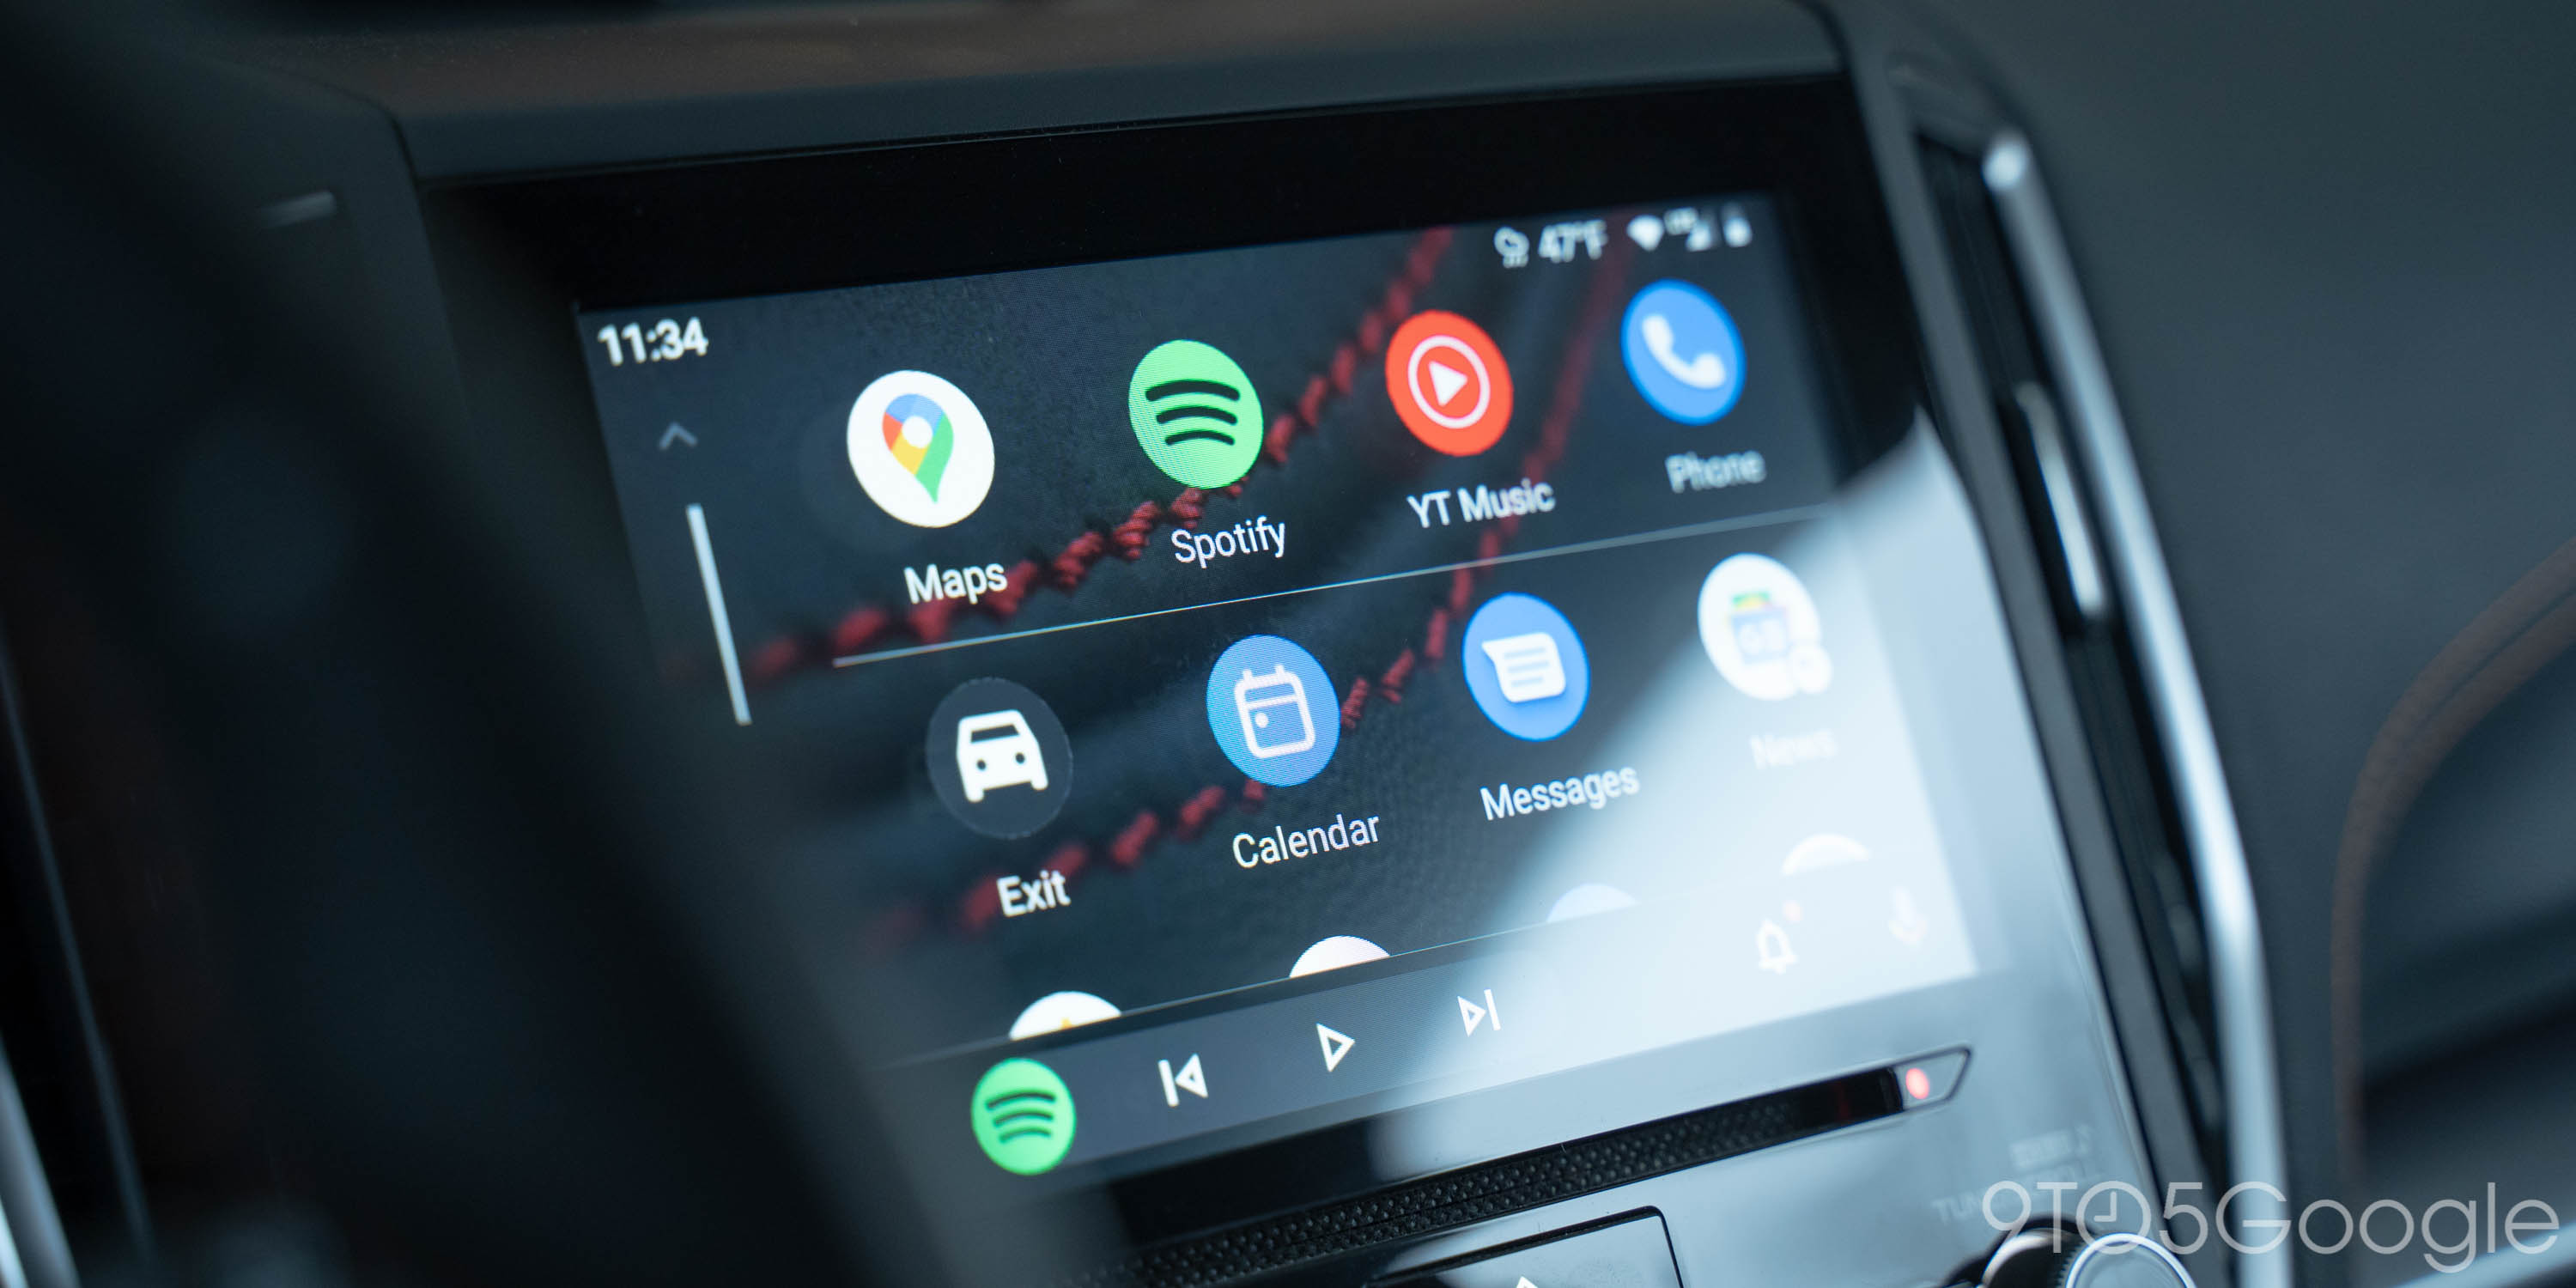 Android Auto split-screen support begins rolling out - 9to5Google